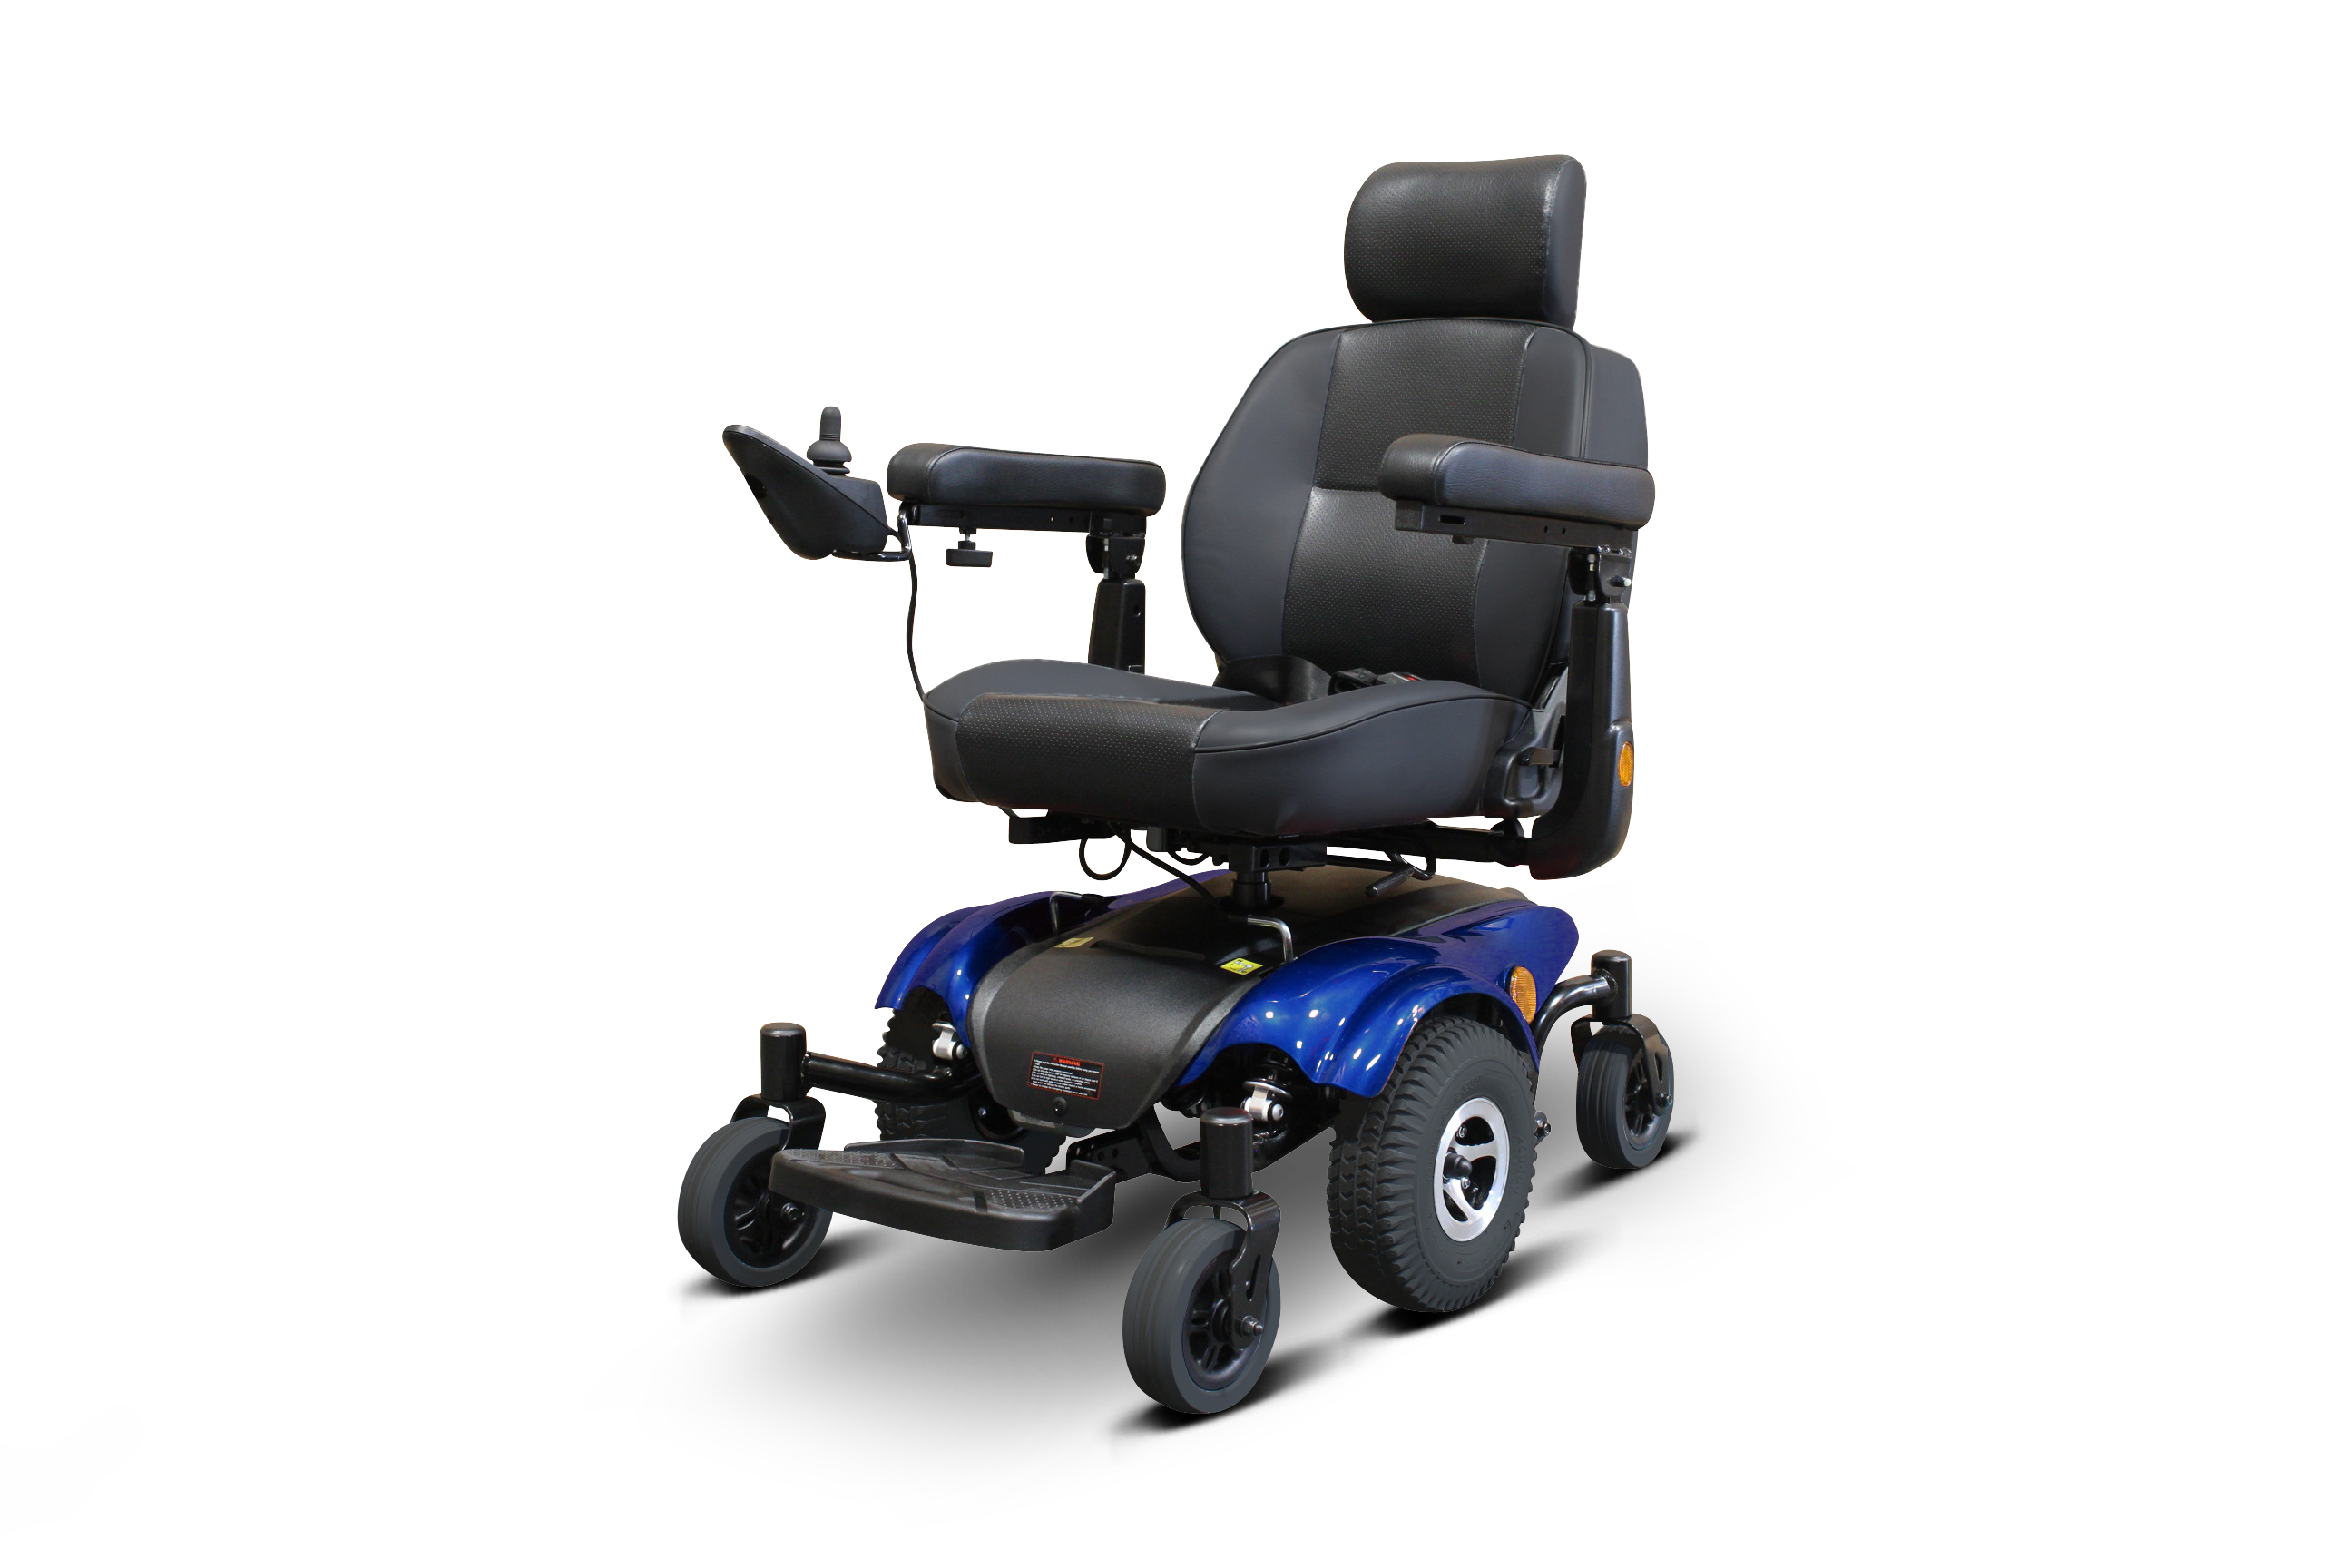 BLUE power wheelchair EW-M48 Heavy Duty Power Wheelchair with Deluxe Captain Seat By E-Wheel Medical - PureUps